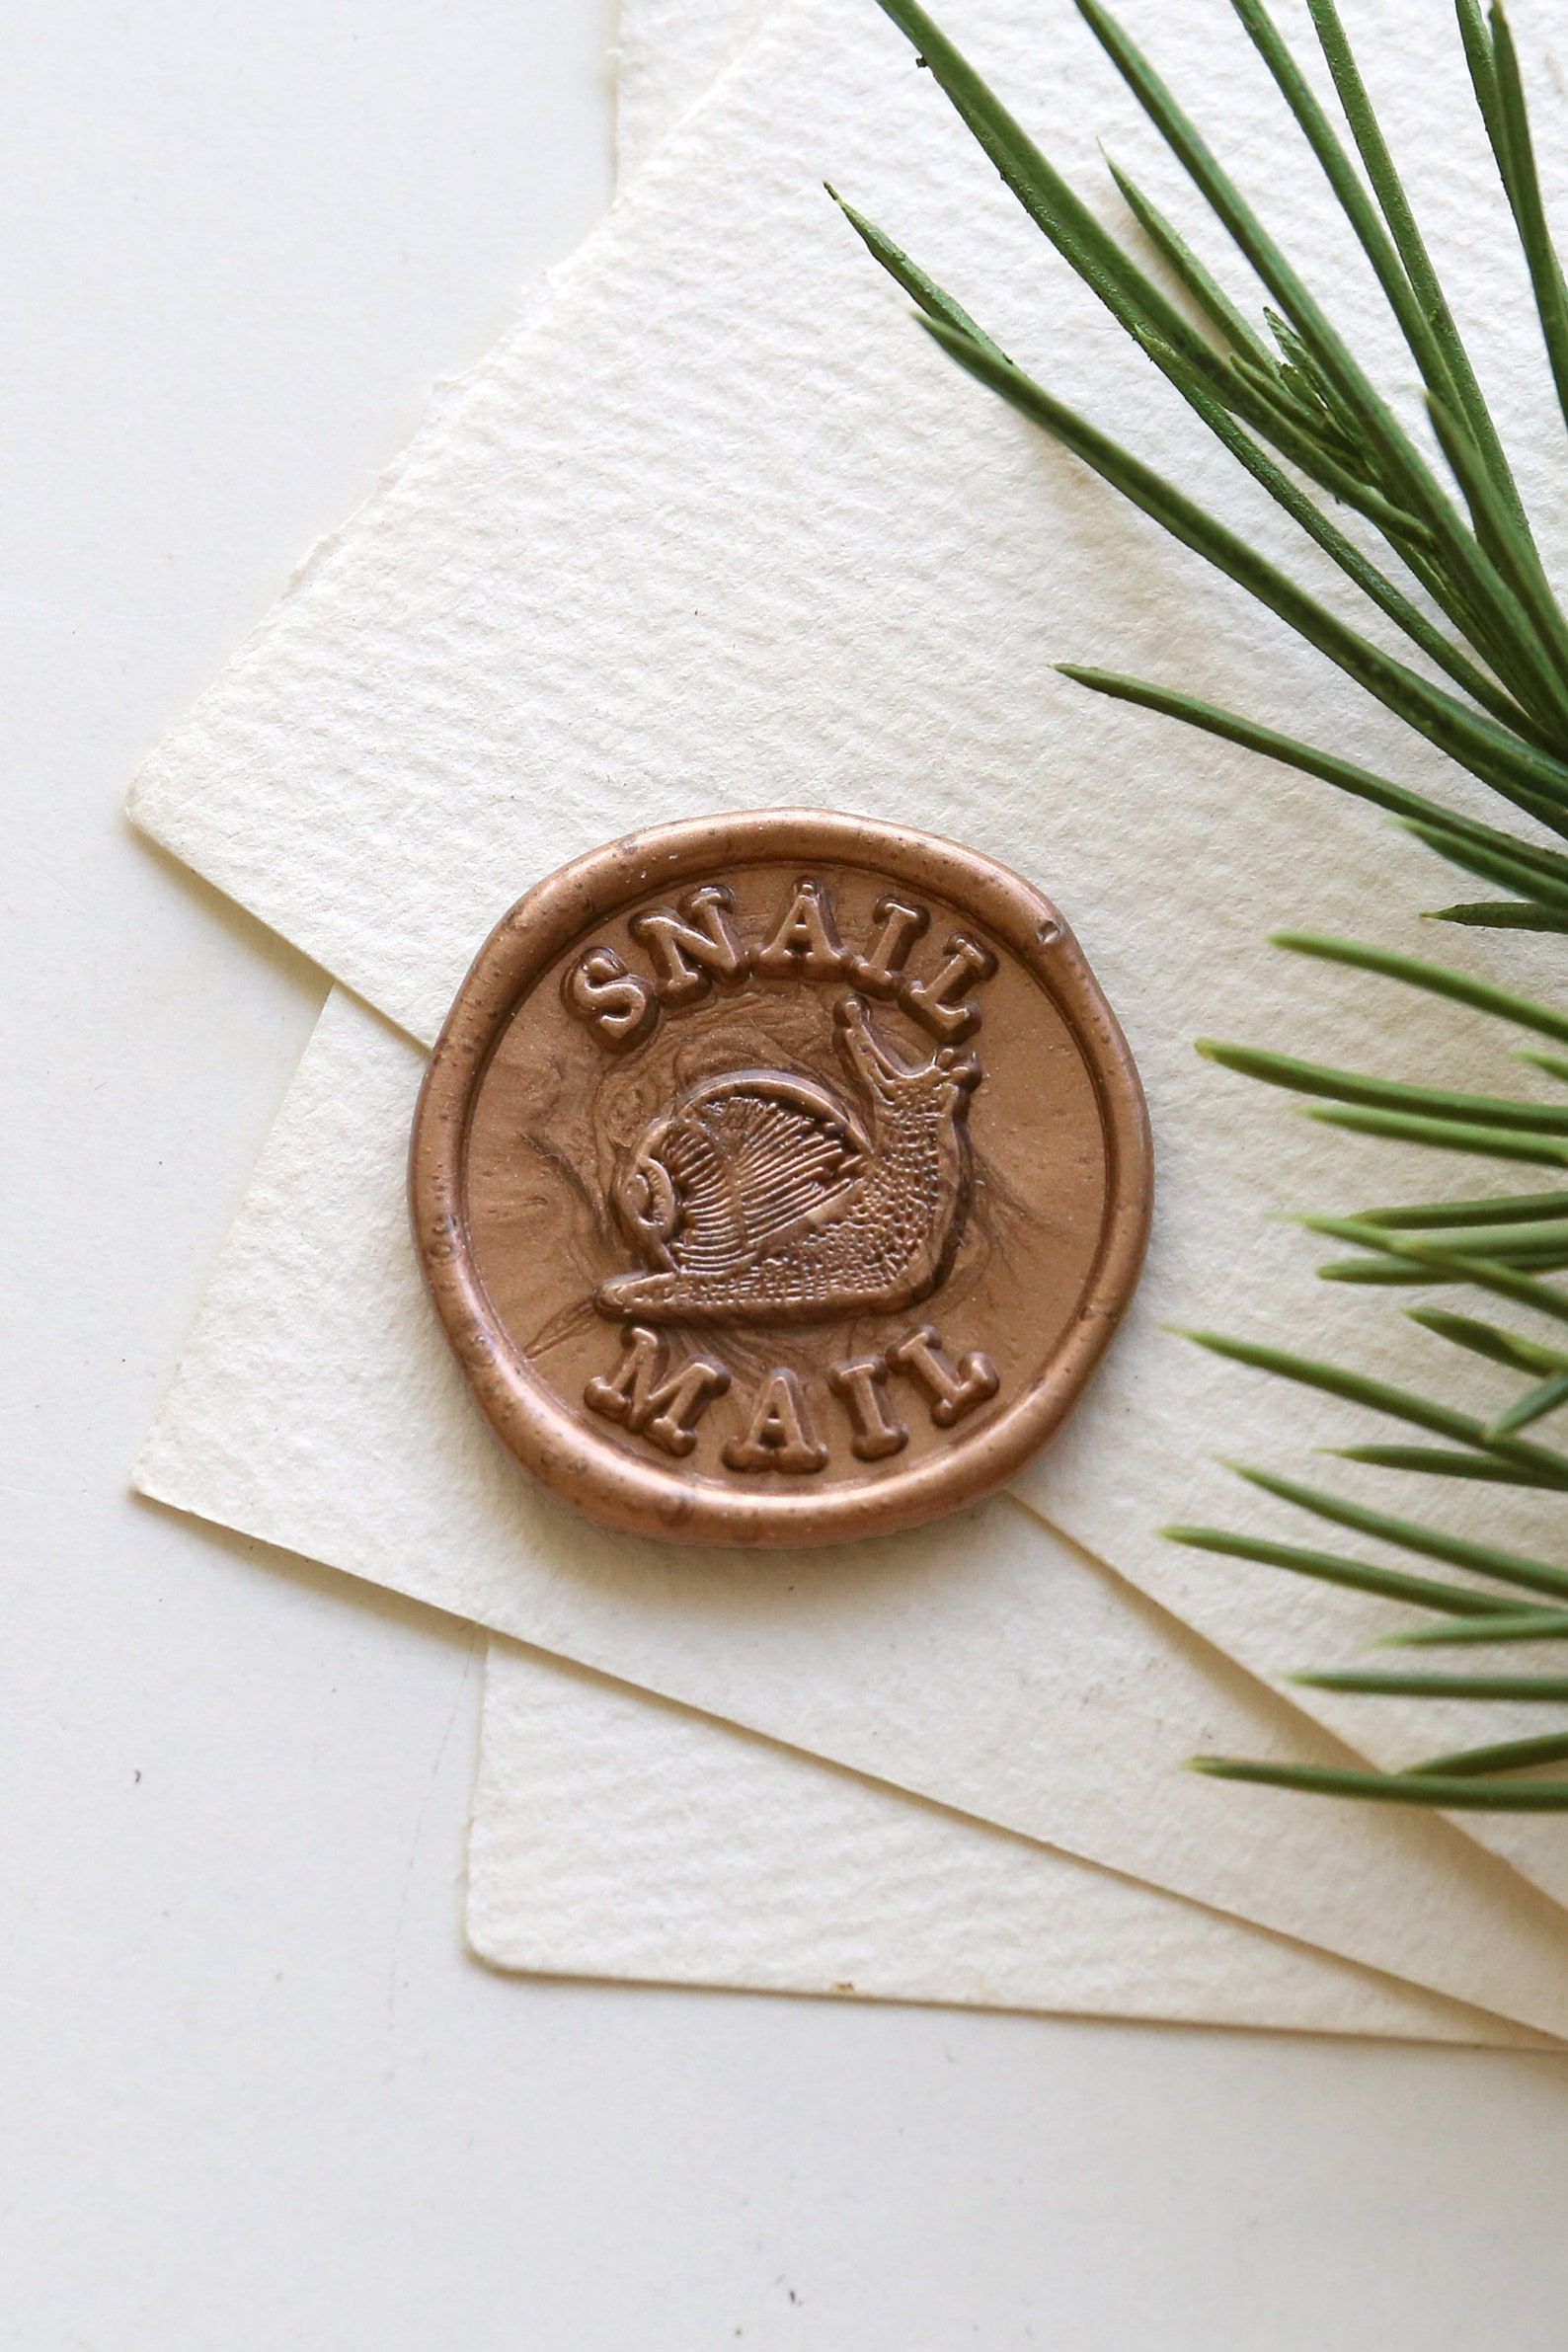 Image of a wax stamp. The center of the stamp has a snail, and the stamp reads 